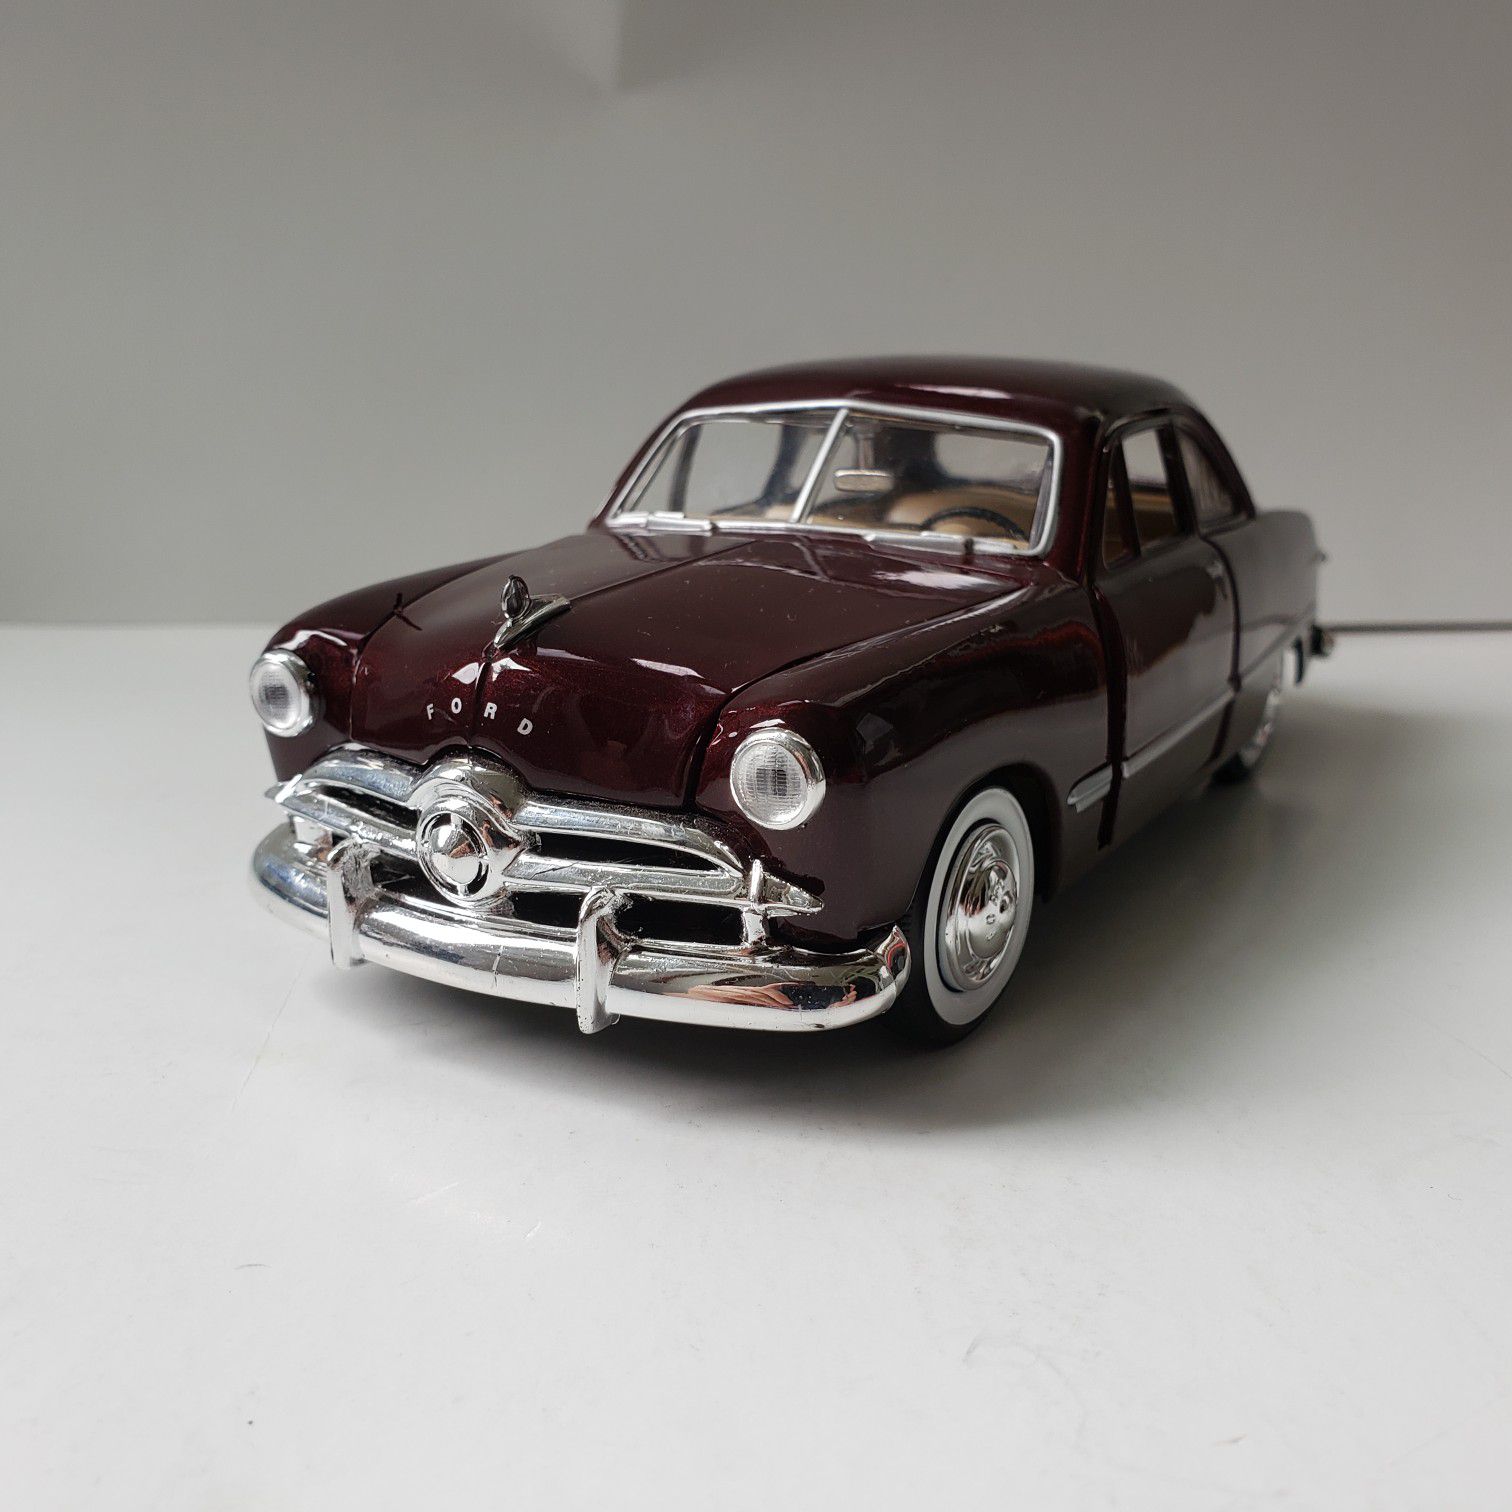 NEW Large 1949 Red Ford Coupe Sedan Car Toy Diecast Metal Model Scale 1/24 1:24 124 Vintage 1940s Classic